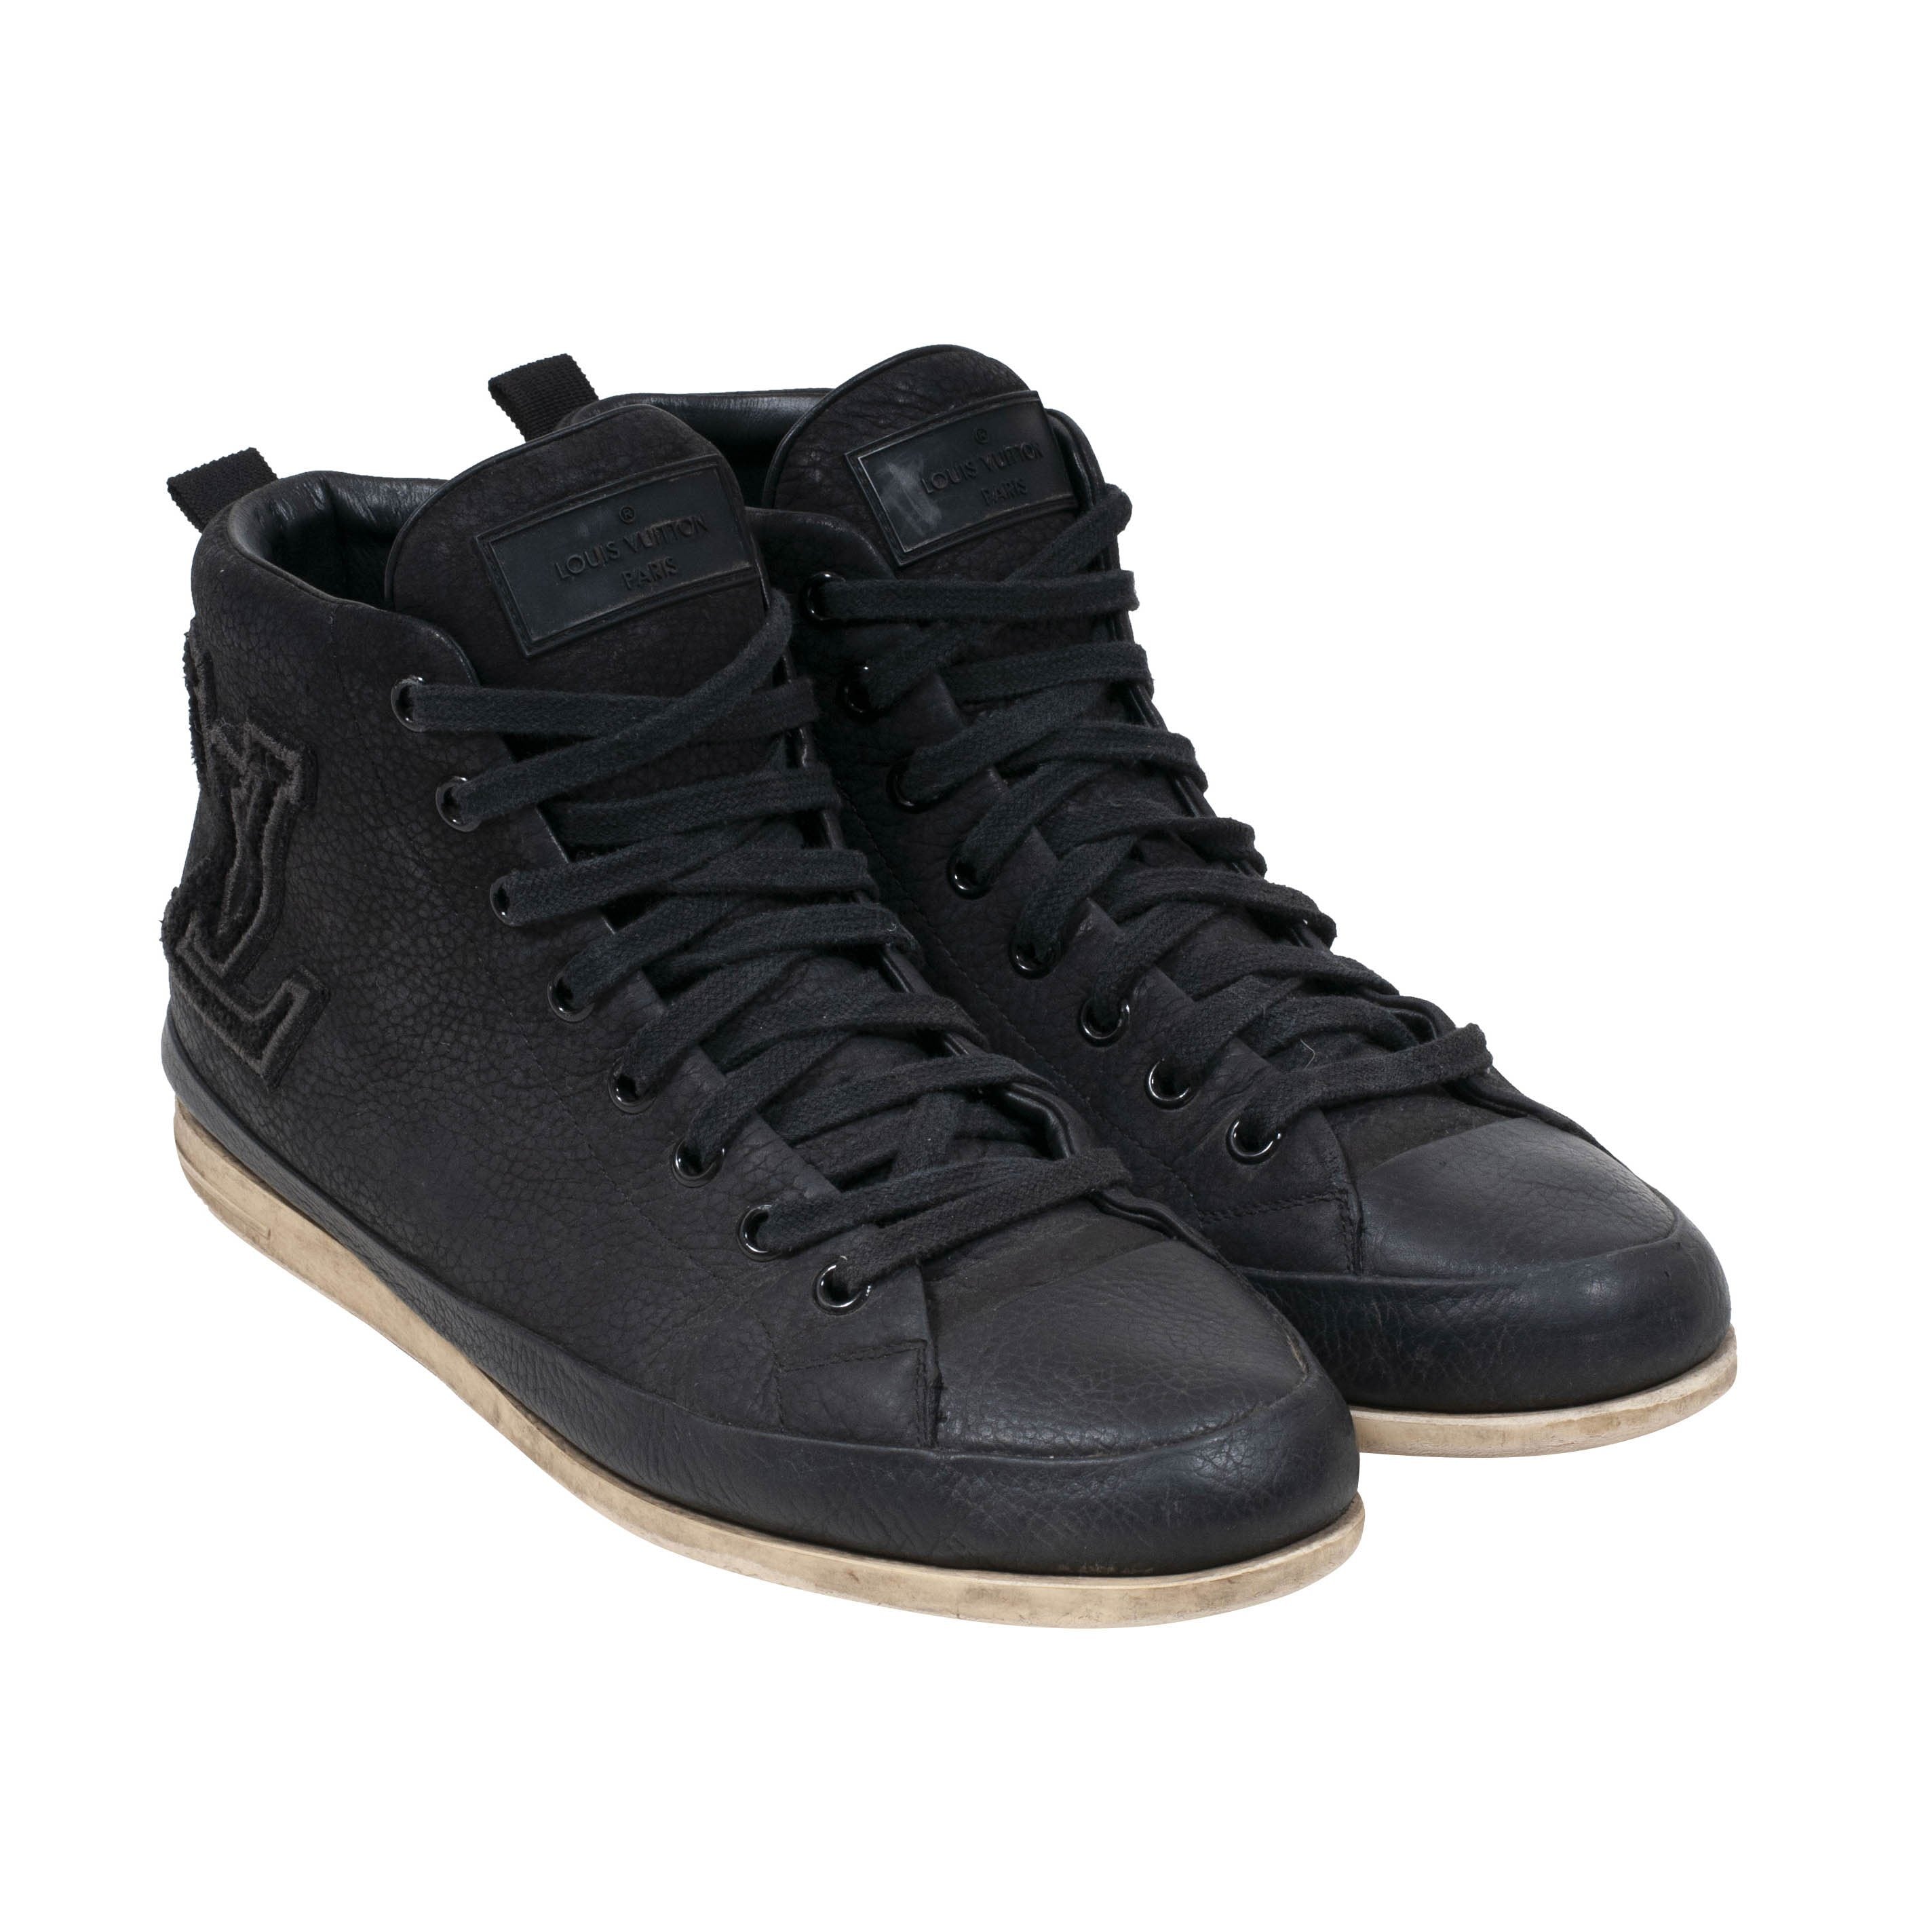 Louis Vuitton LV Black High Top Logo Trainers Sneakers Lv Size 11